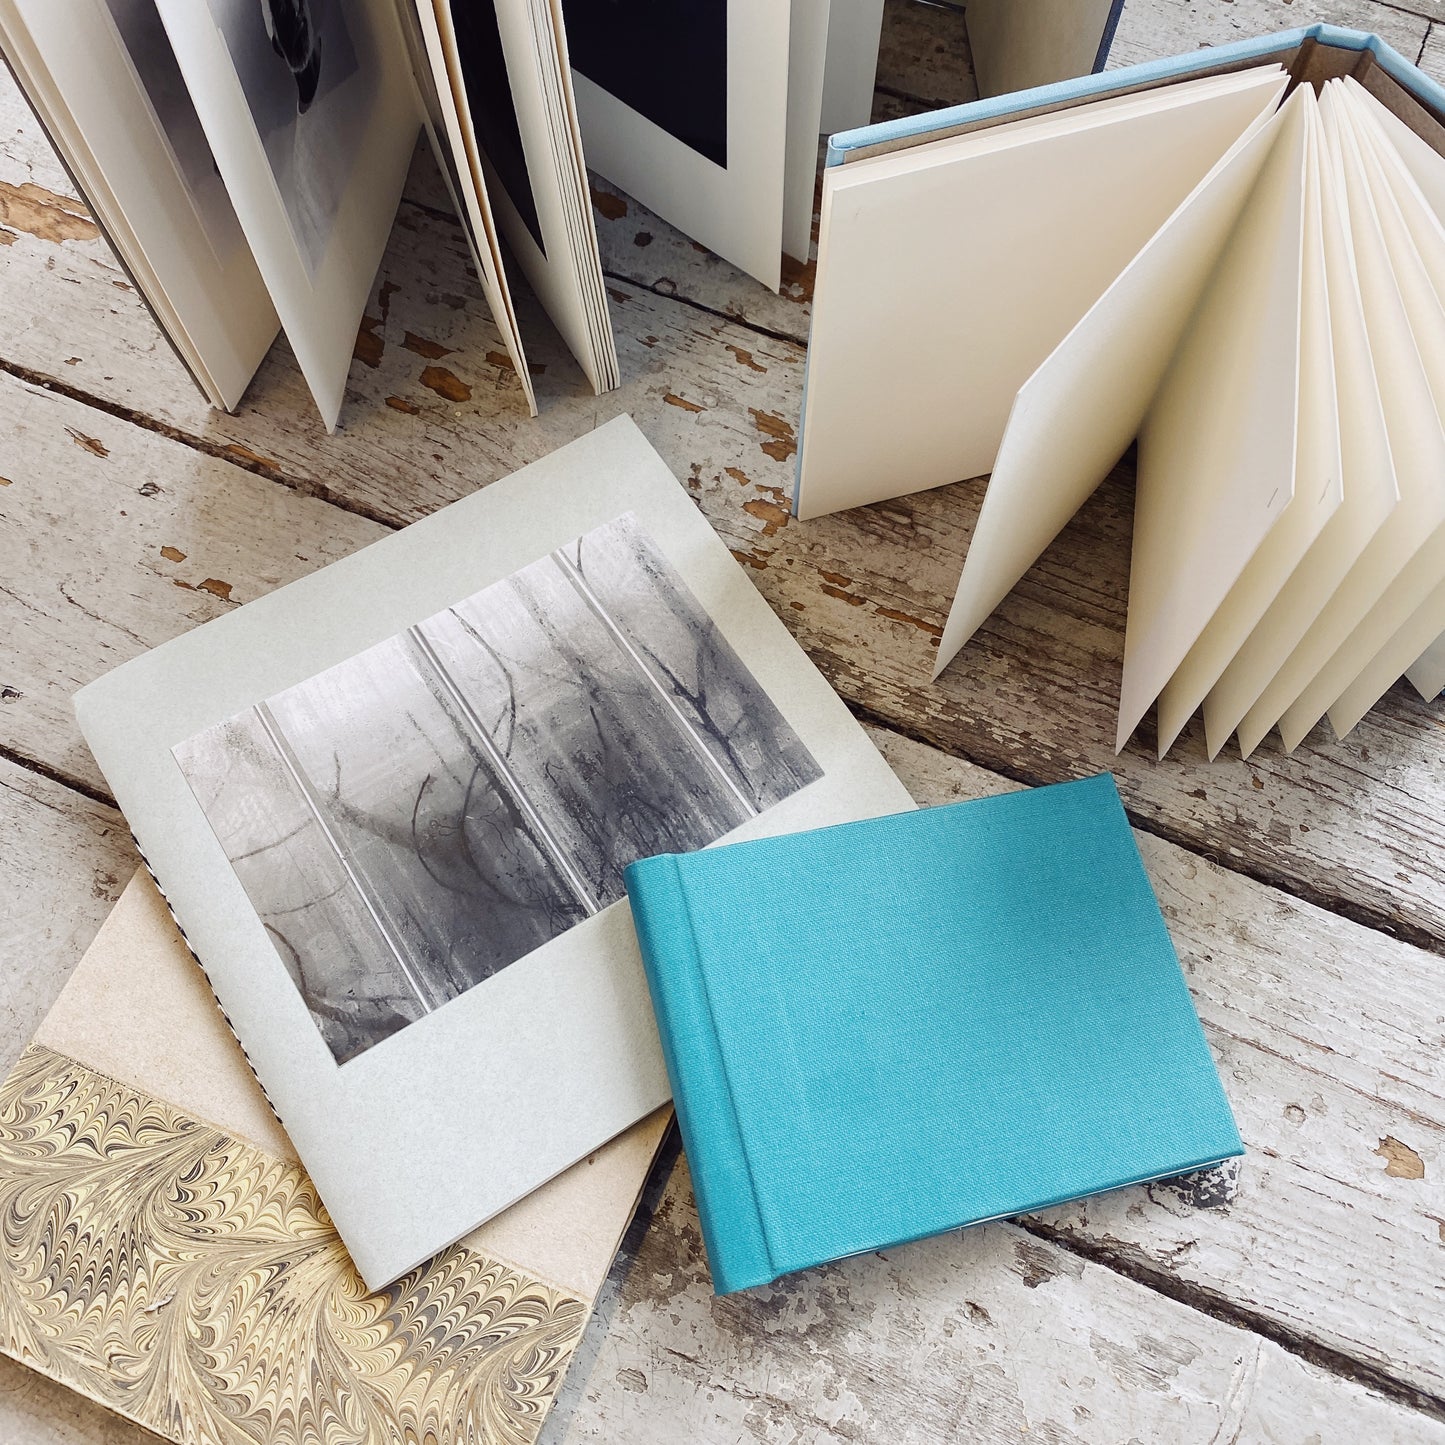 Bookmaking and Image Sequencing Workshop - 2nd February 10:00am